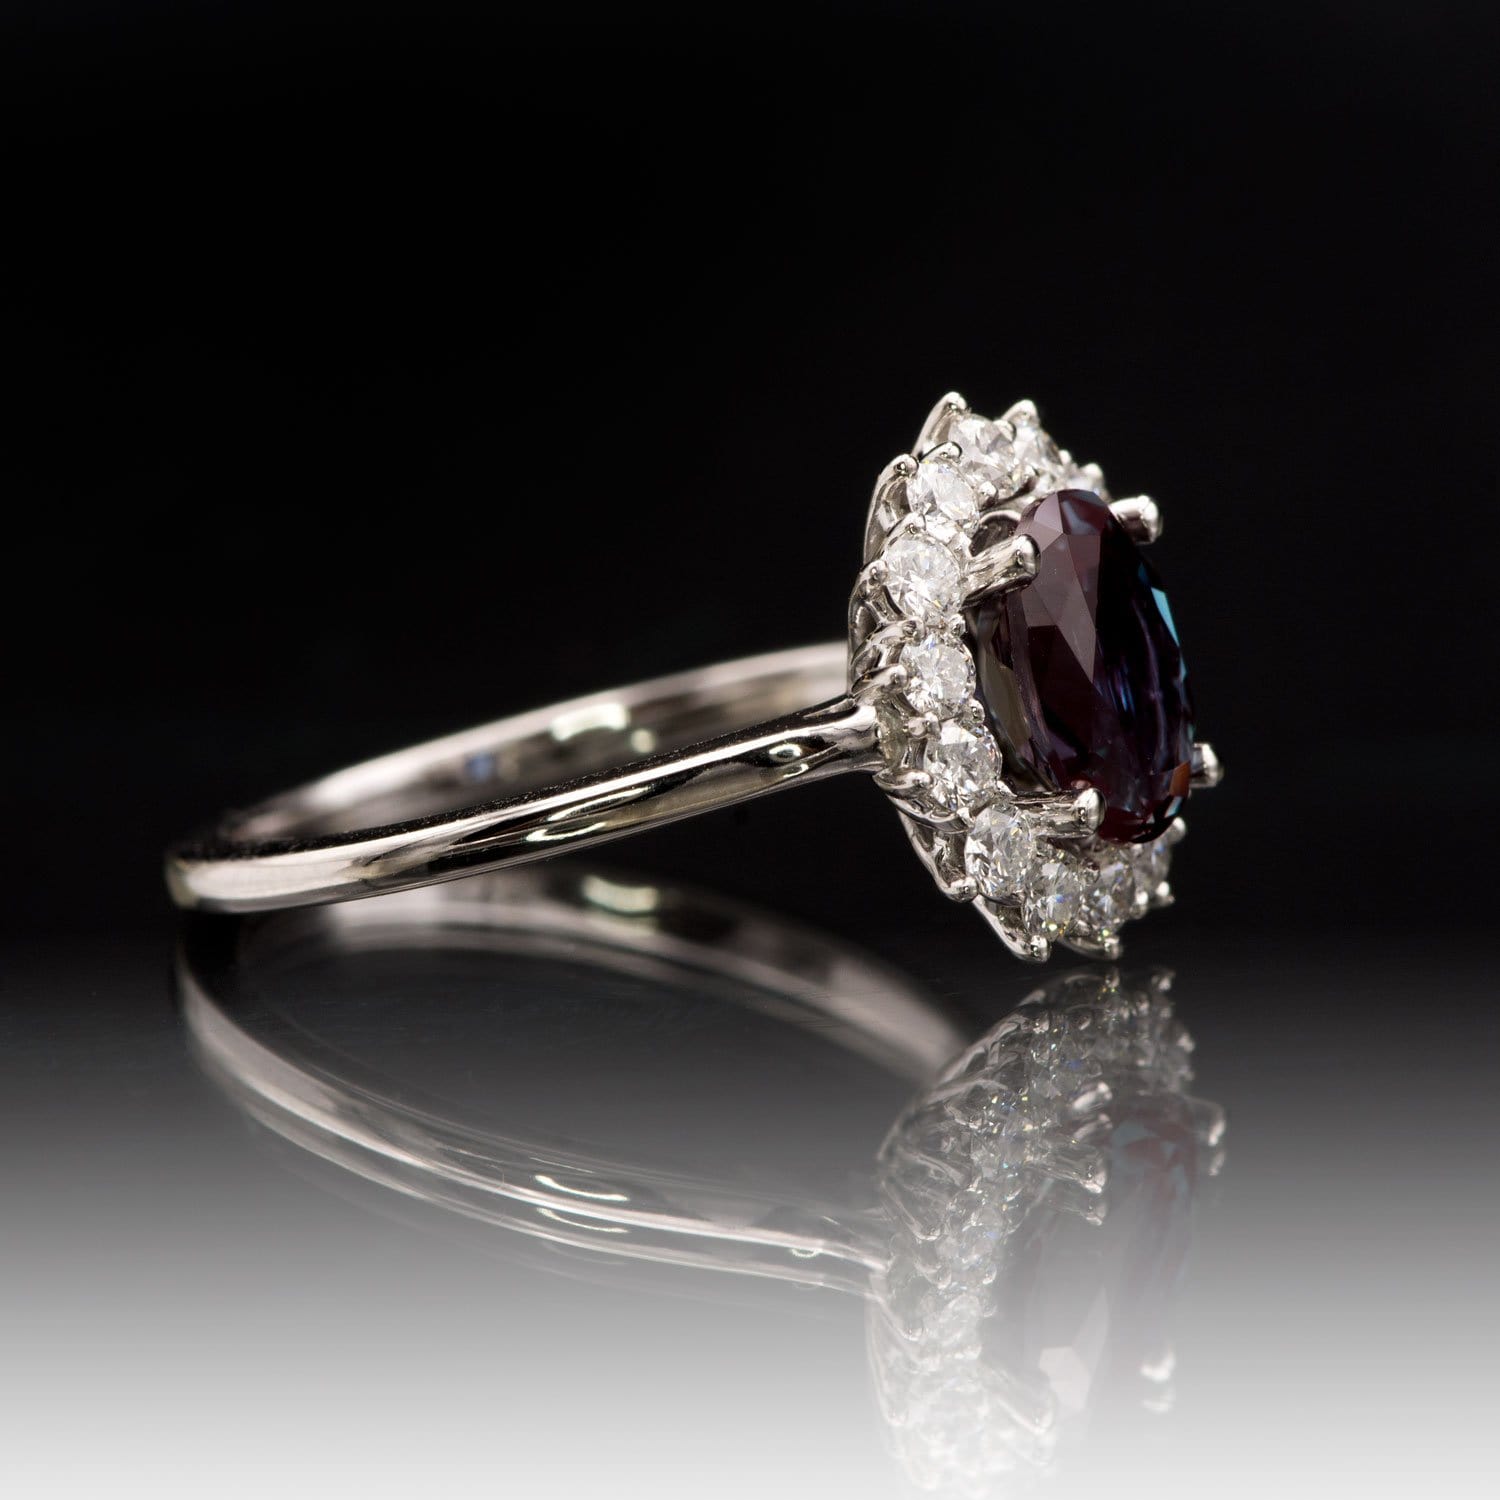 Ophelia - Oval Lab-Created Alexandrite Prong Set Halo Engagement Ring Ring by Nodeform